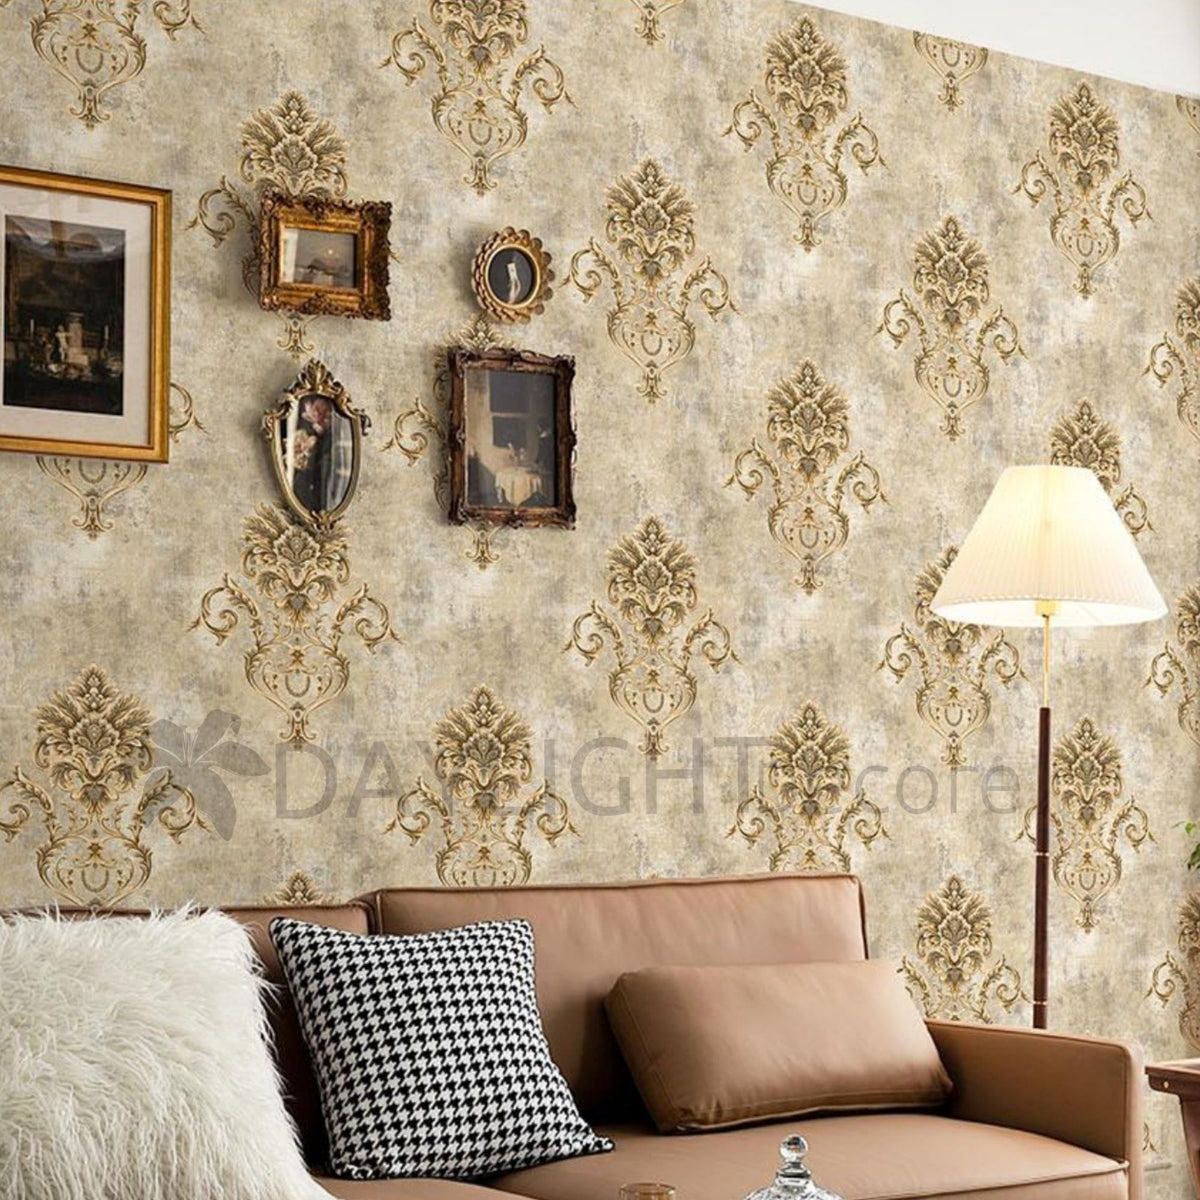 Yellow Beige Damask Modern Design Wallpaper Roll for Wall Covering Living Room, Bedroom Wall Tejas